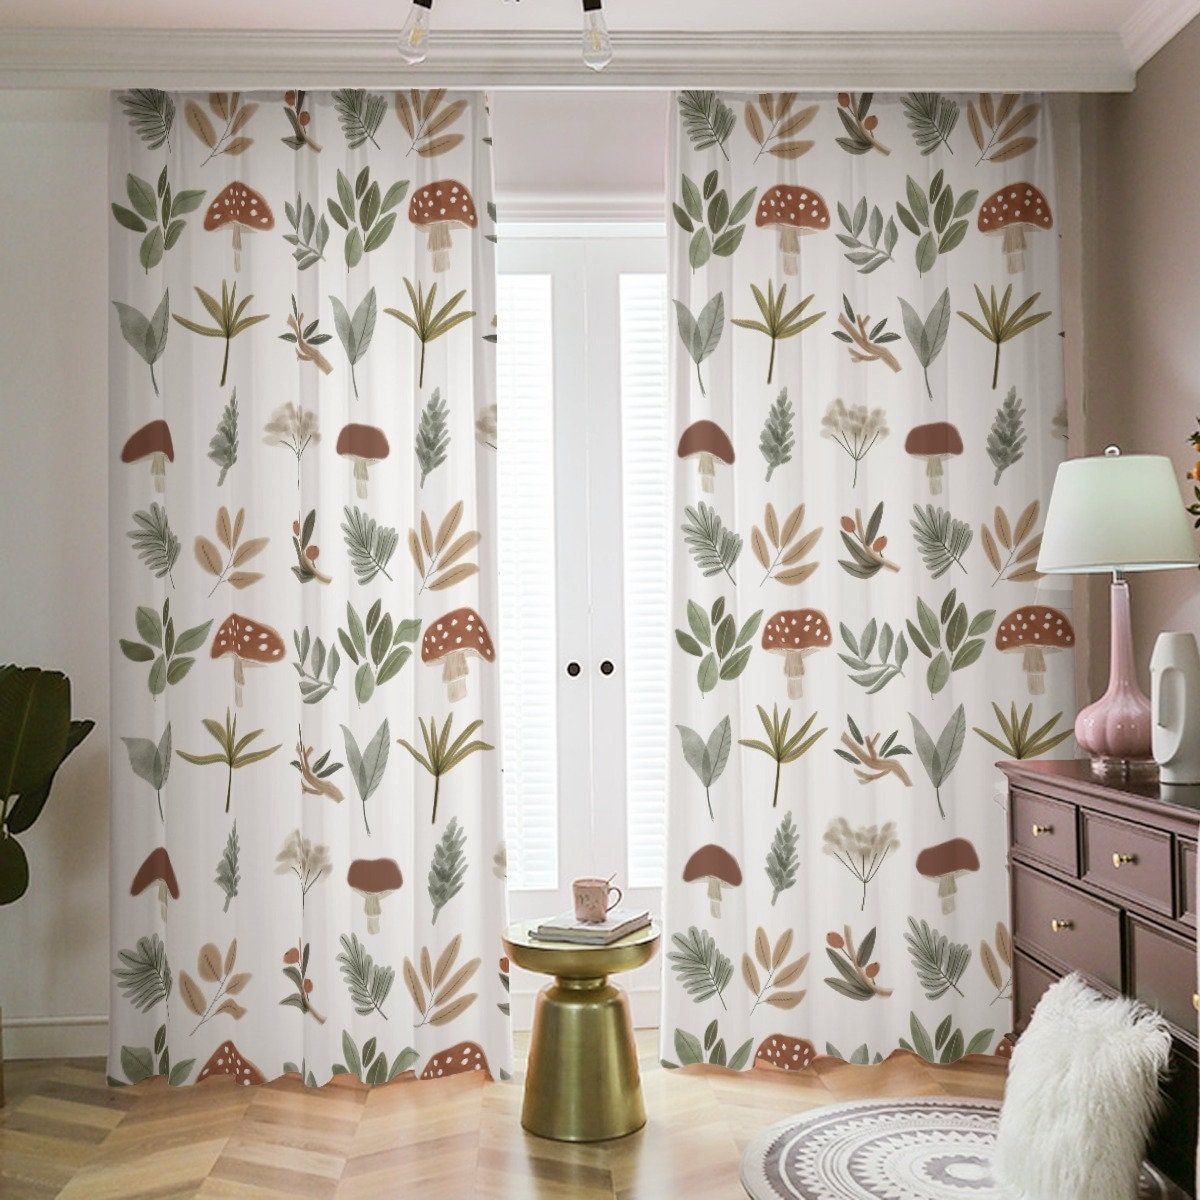 How To Get Hold Of The Nursery Curtains?